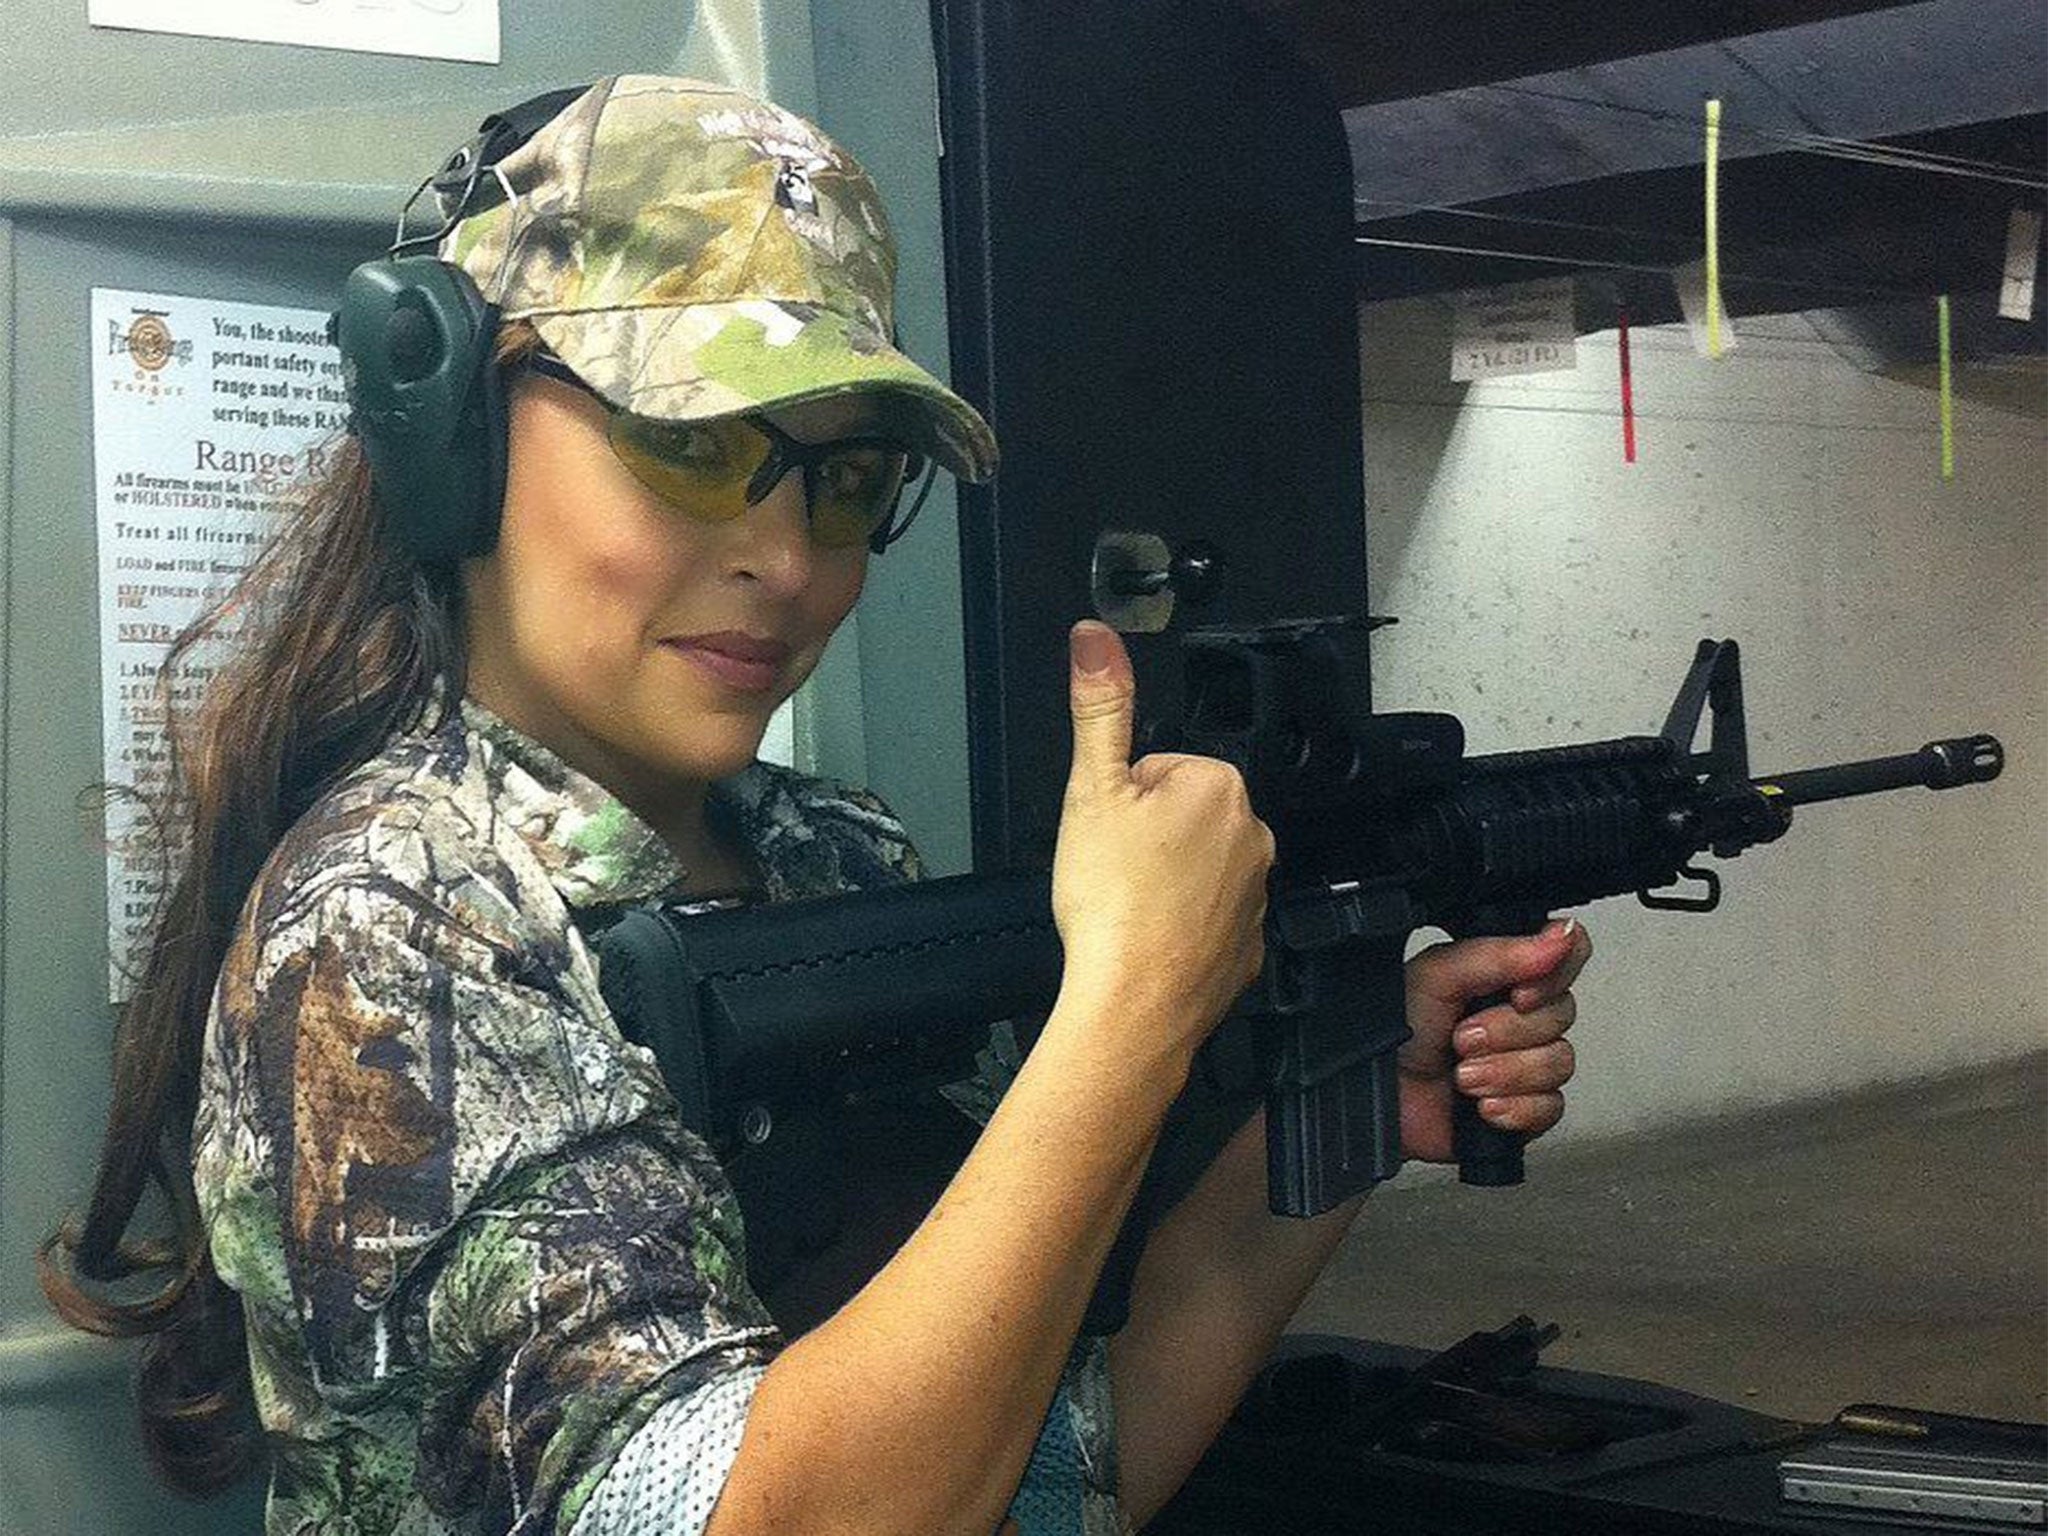 Jan Morgan claims she banned Muslims from her shooting range as a 'matter of public safety'